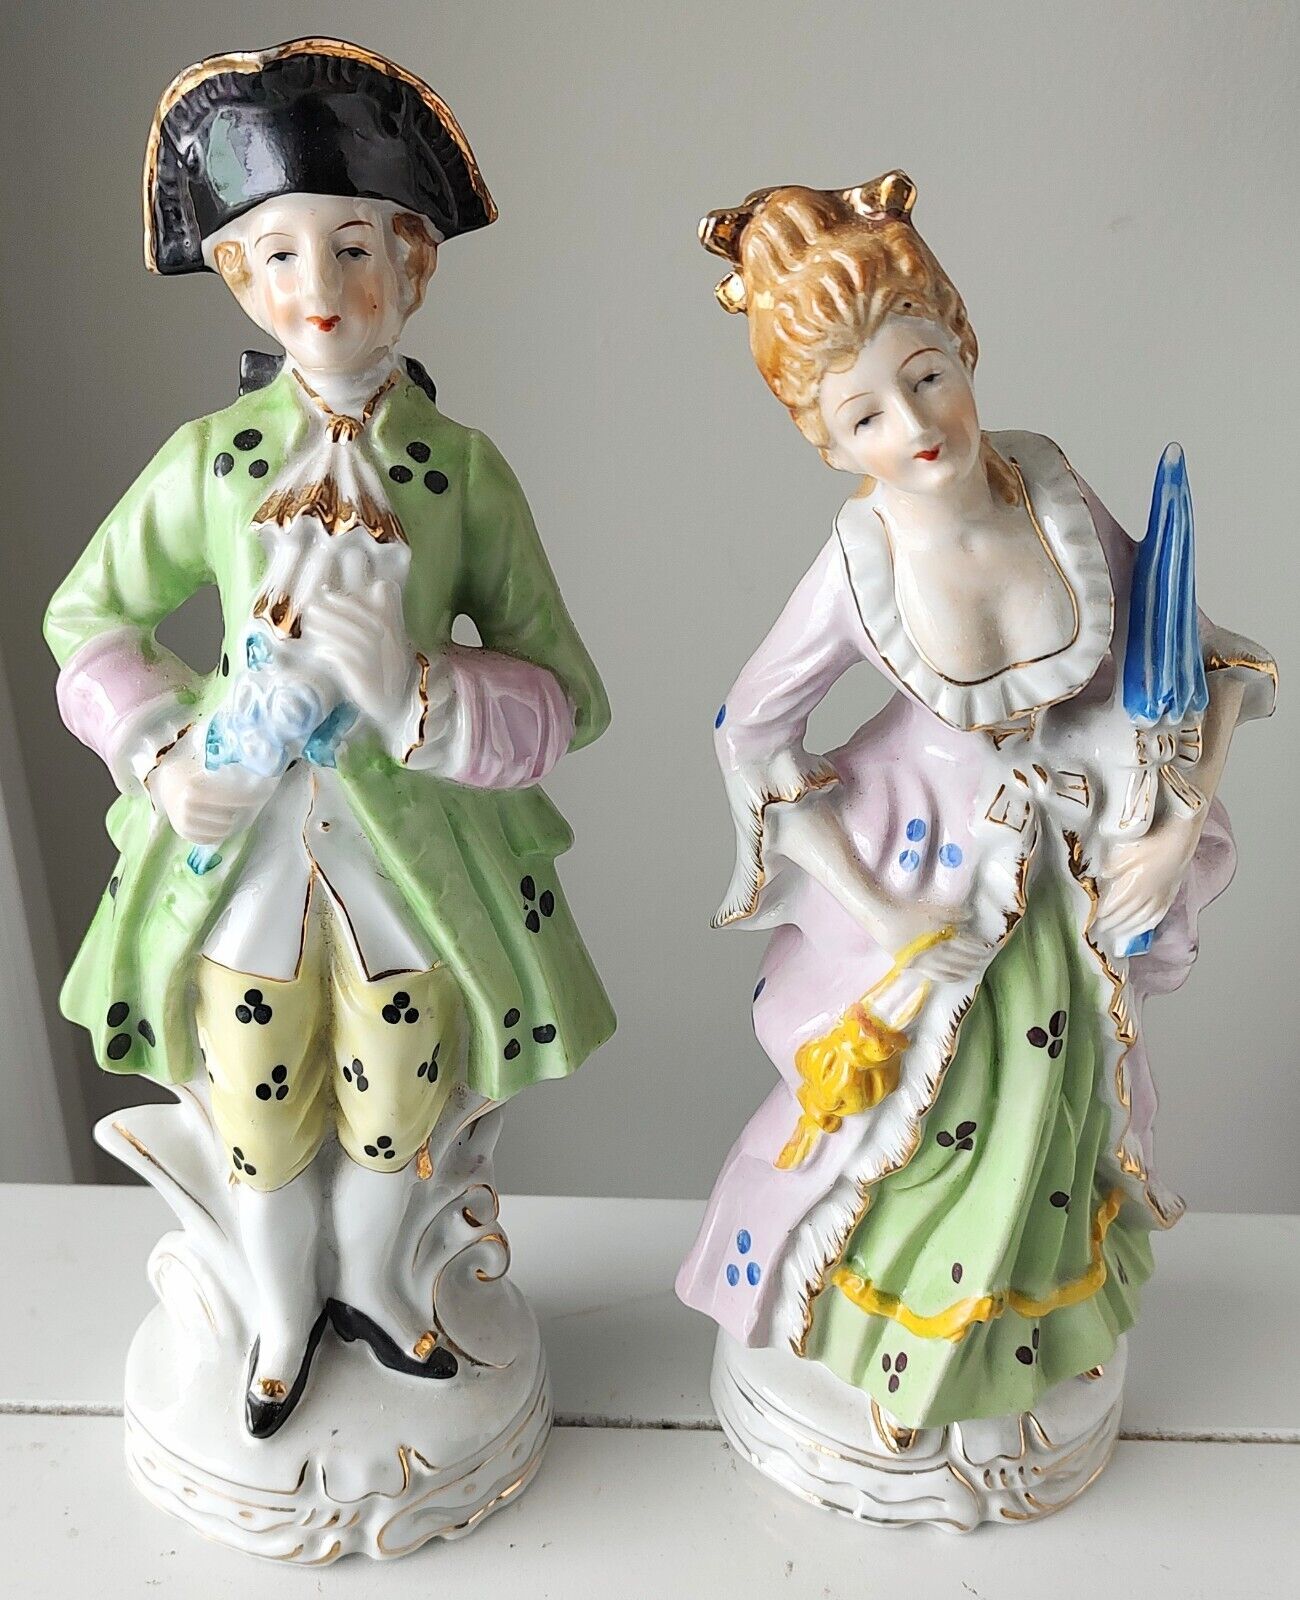 2 Vintage Male and Female Couple Figure Japan Porcelain Colonial 18th Century